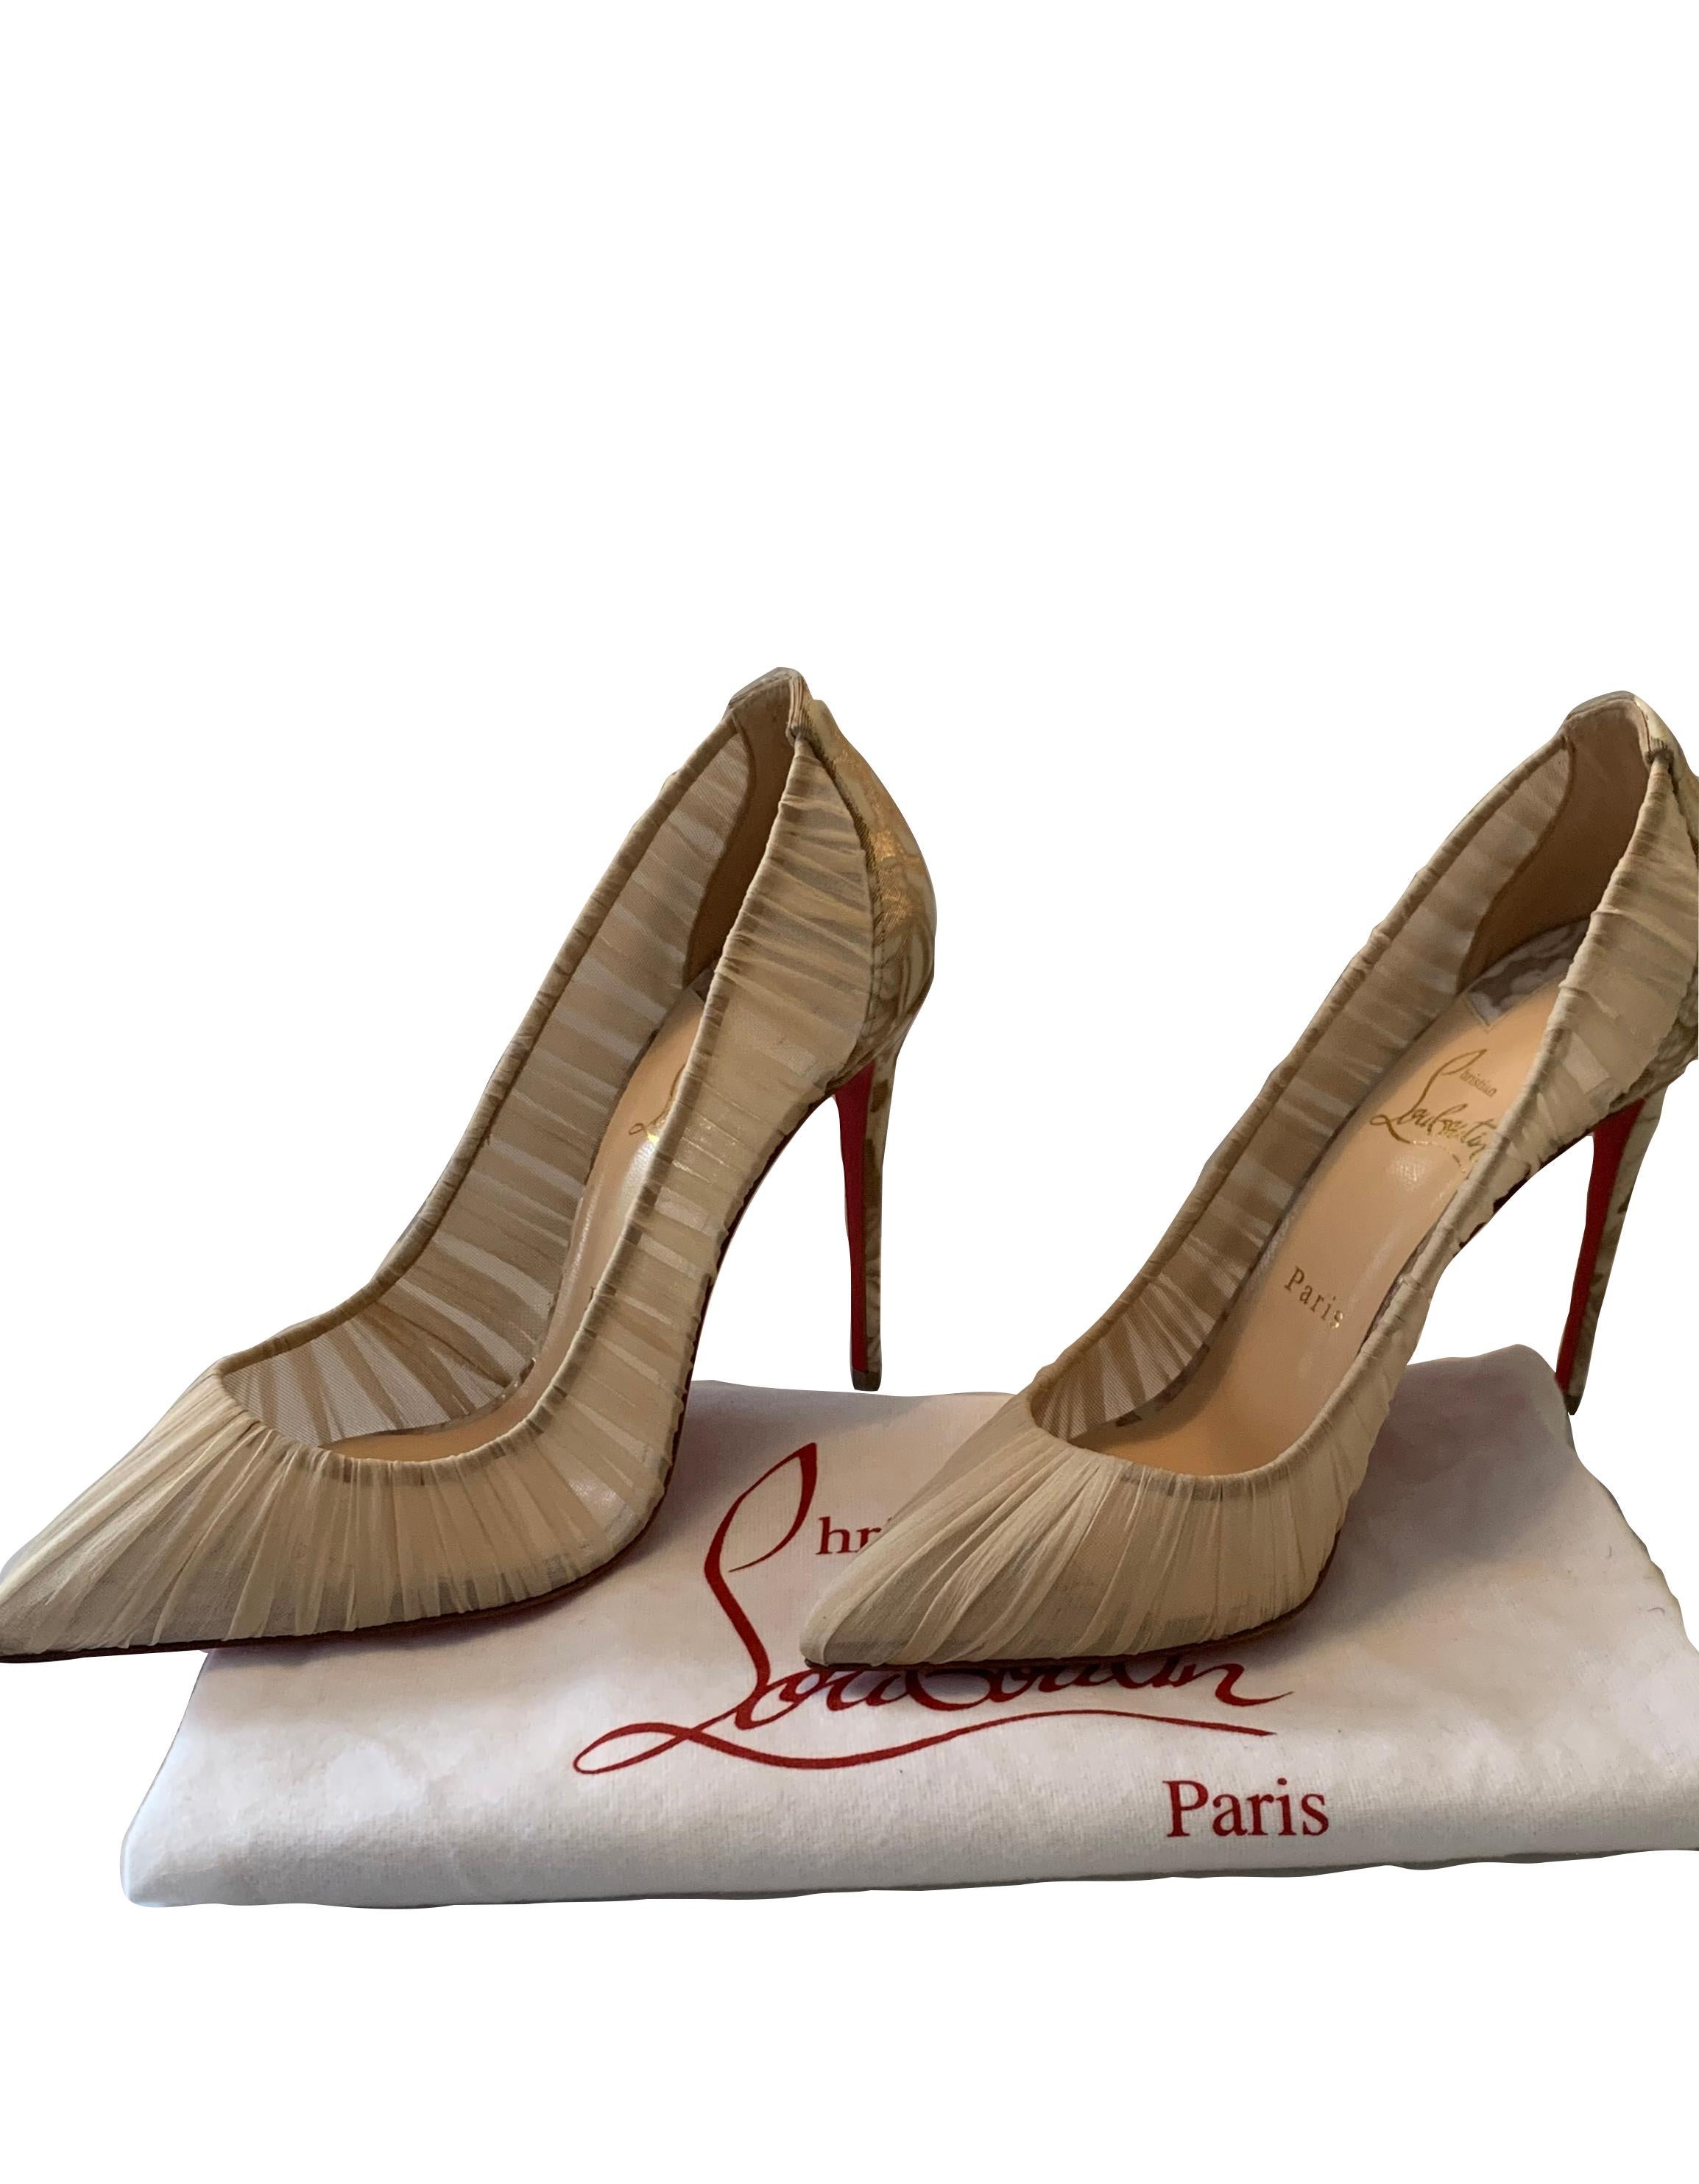 Christian Louboutin Beige Follie Draperia 100 High Heel Pumps sz 39.5.  Features rose design on back and heels of shoes.

Made In: Italy
Color: Beige
Materials: Chiffon
Overall Condition: Like new condition.  
Estimated Retail: $795 plus